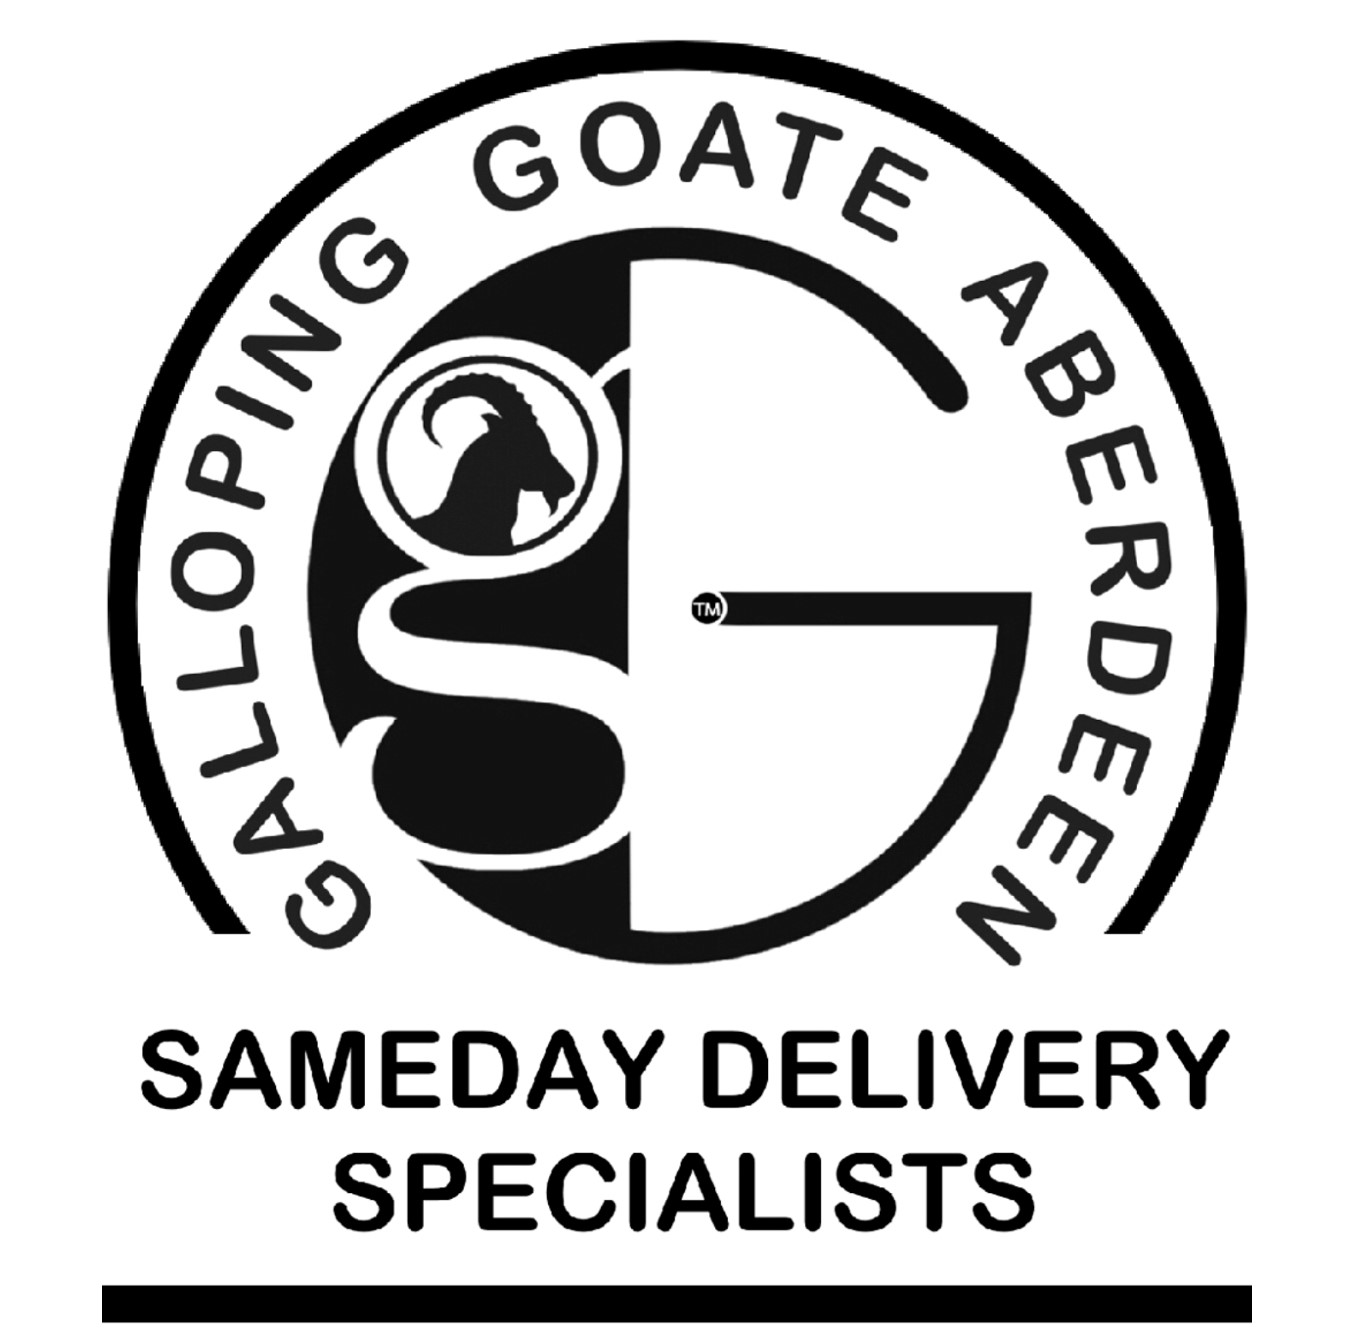 Galloping Goate Delivery Service